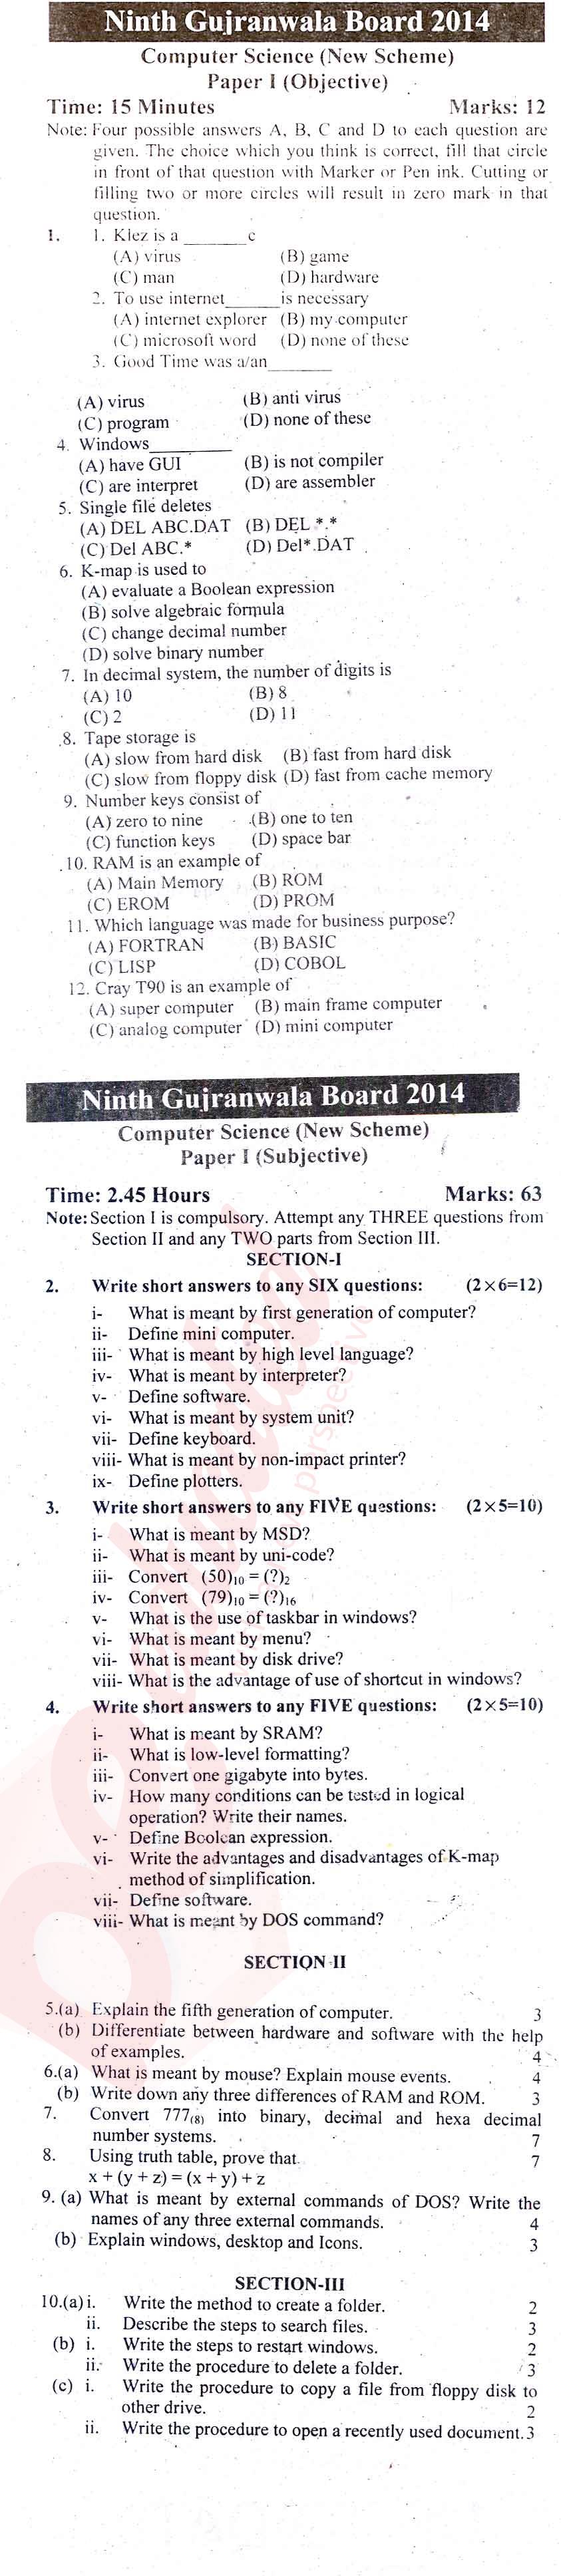 Computer Science 9th English Medium Past Paper Group 1 BISE Gujranwala 2014